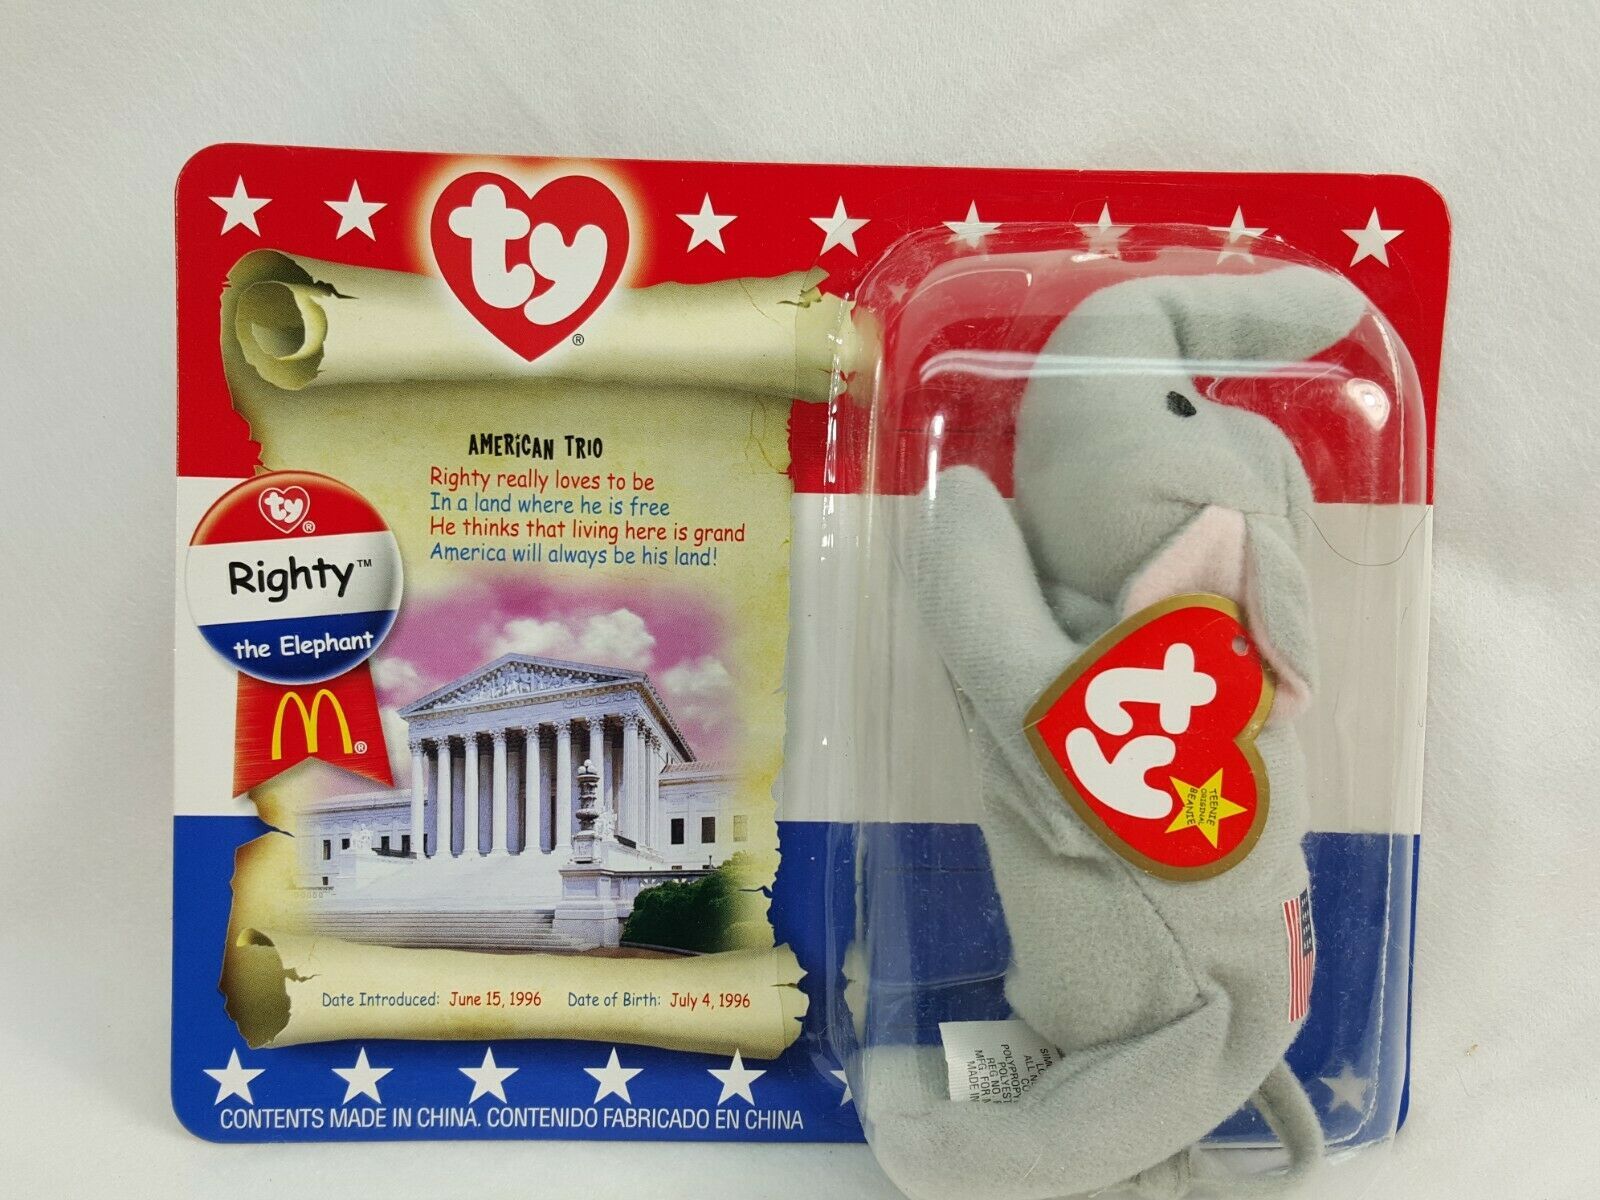 Primary image for TY Teenie Beanie Babies "RIGHTY" The Elephant American Trio New iD92